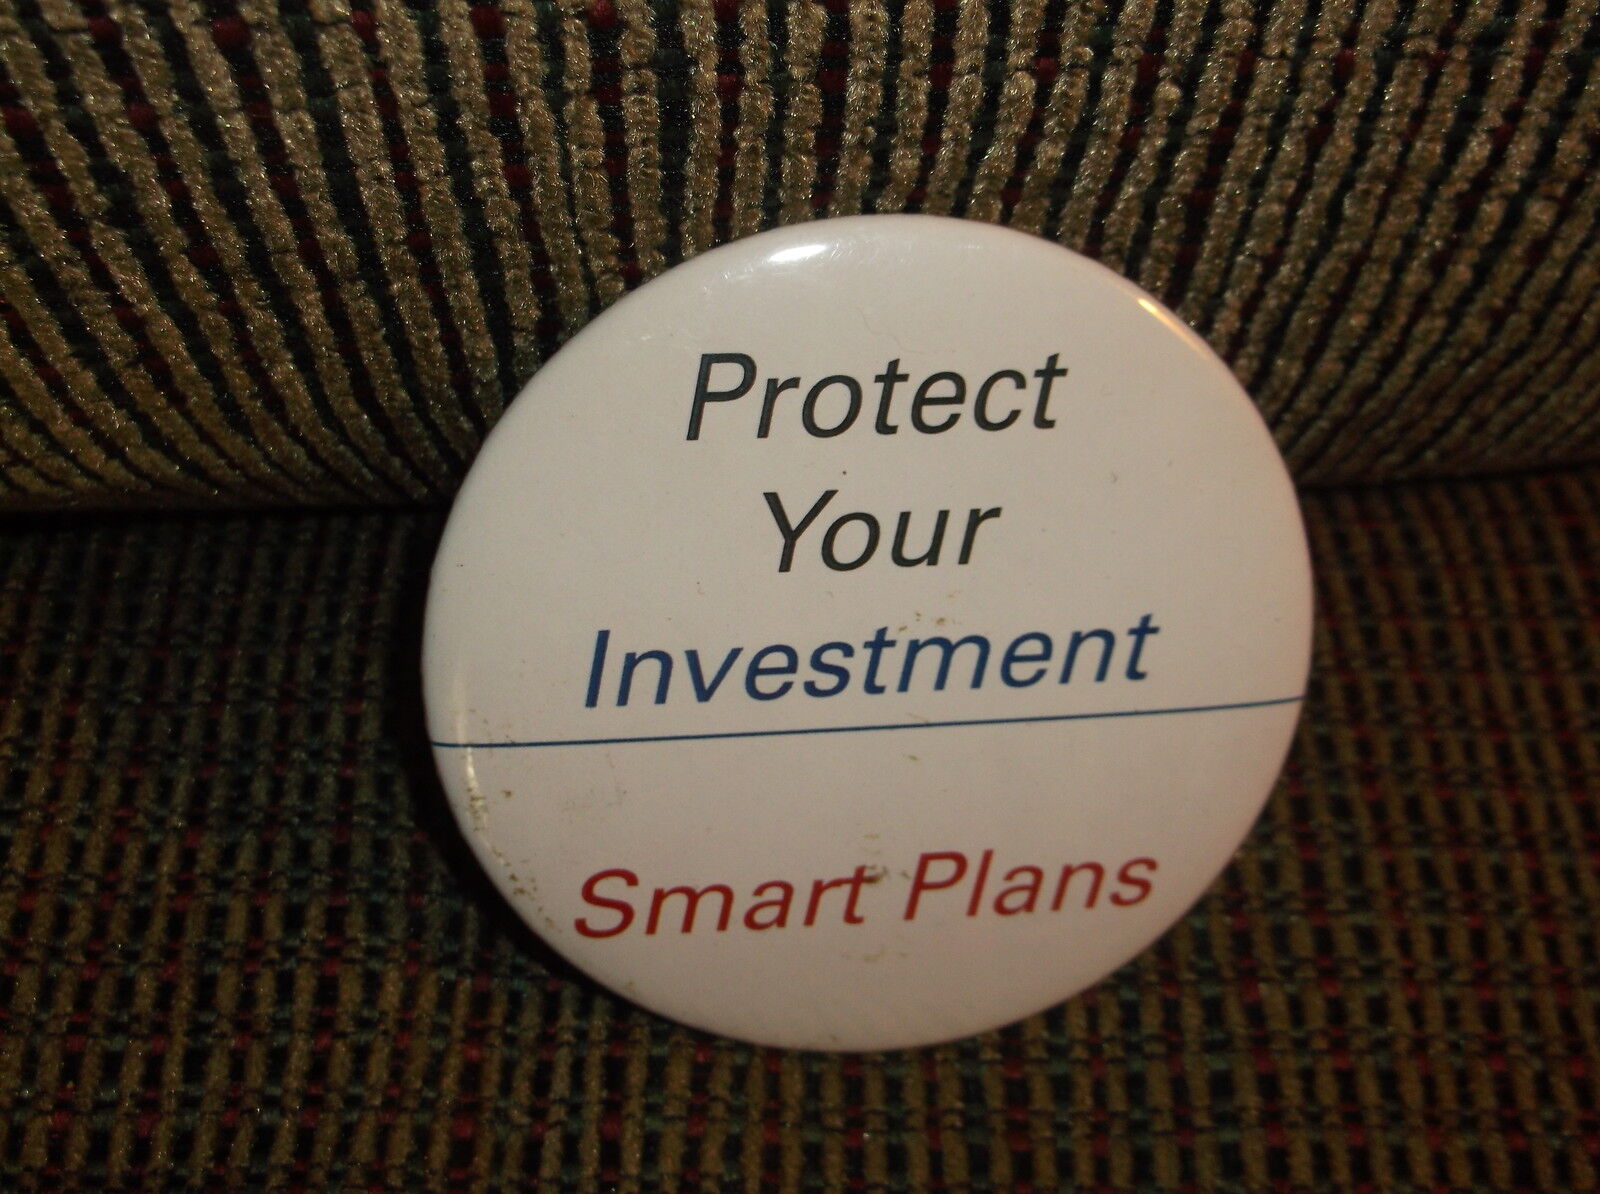 K-MART SMART PLANS PROTECT YOUR INVESTMENT PROMOTIONAL PIN